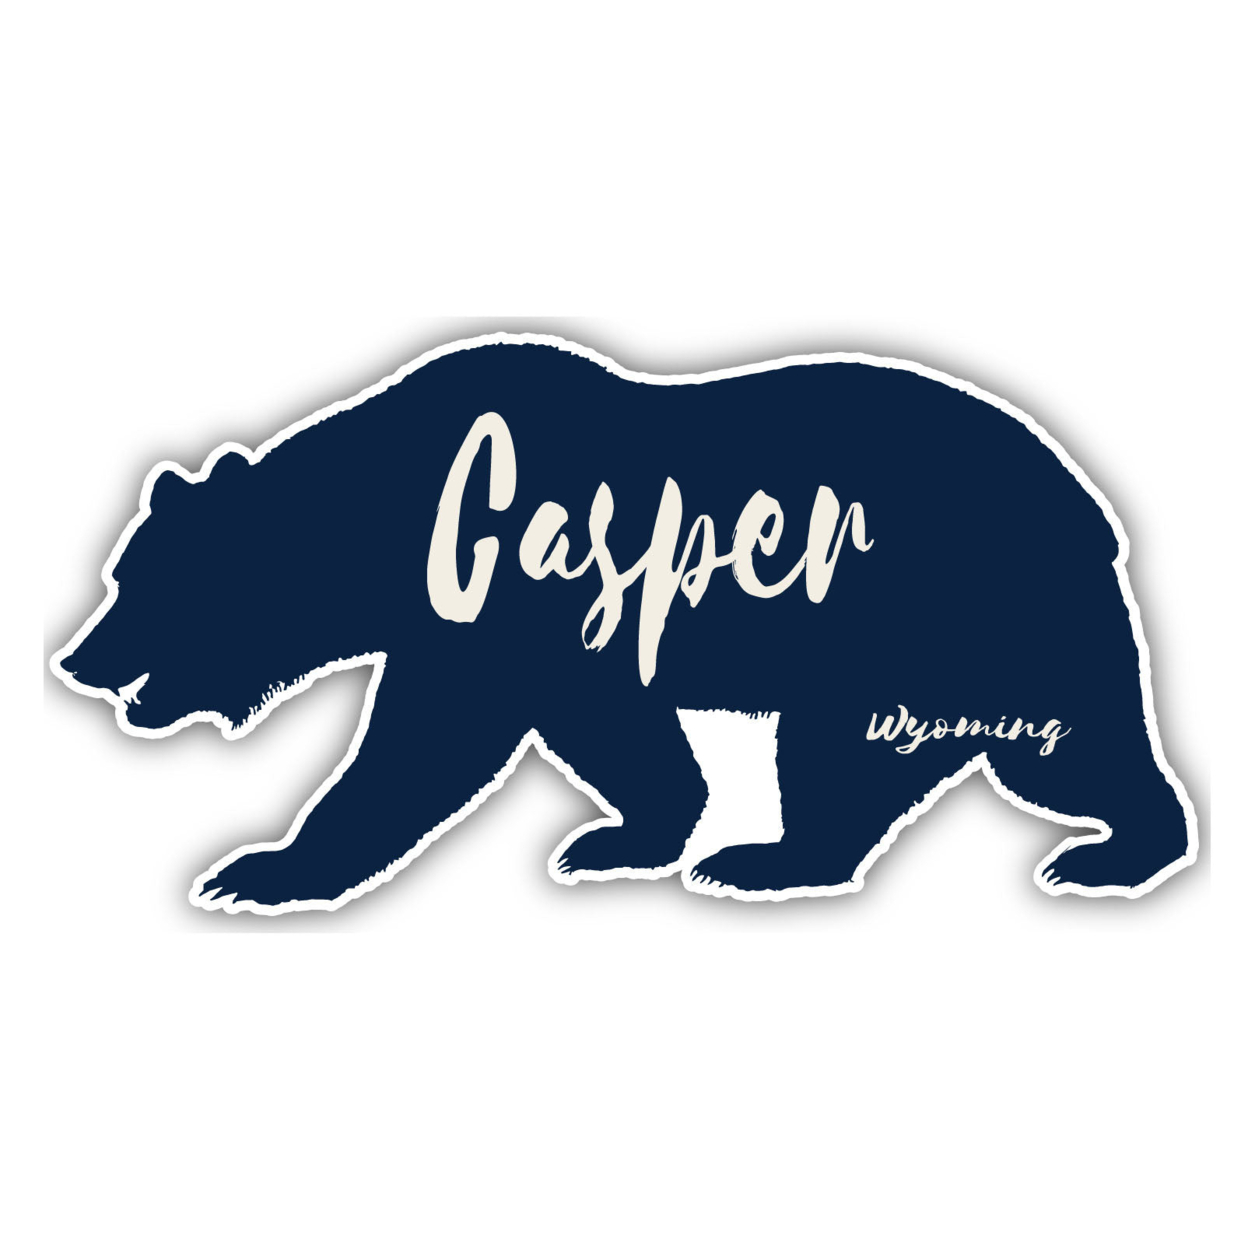 Casper Wyoming Souvenir Decorative Stickers (Choose Theme And Size) - 4-Pack, 10-Inch, Bear